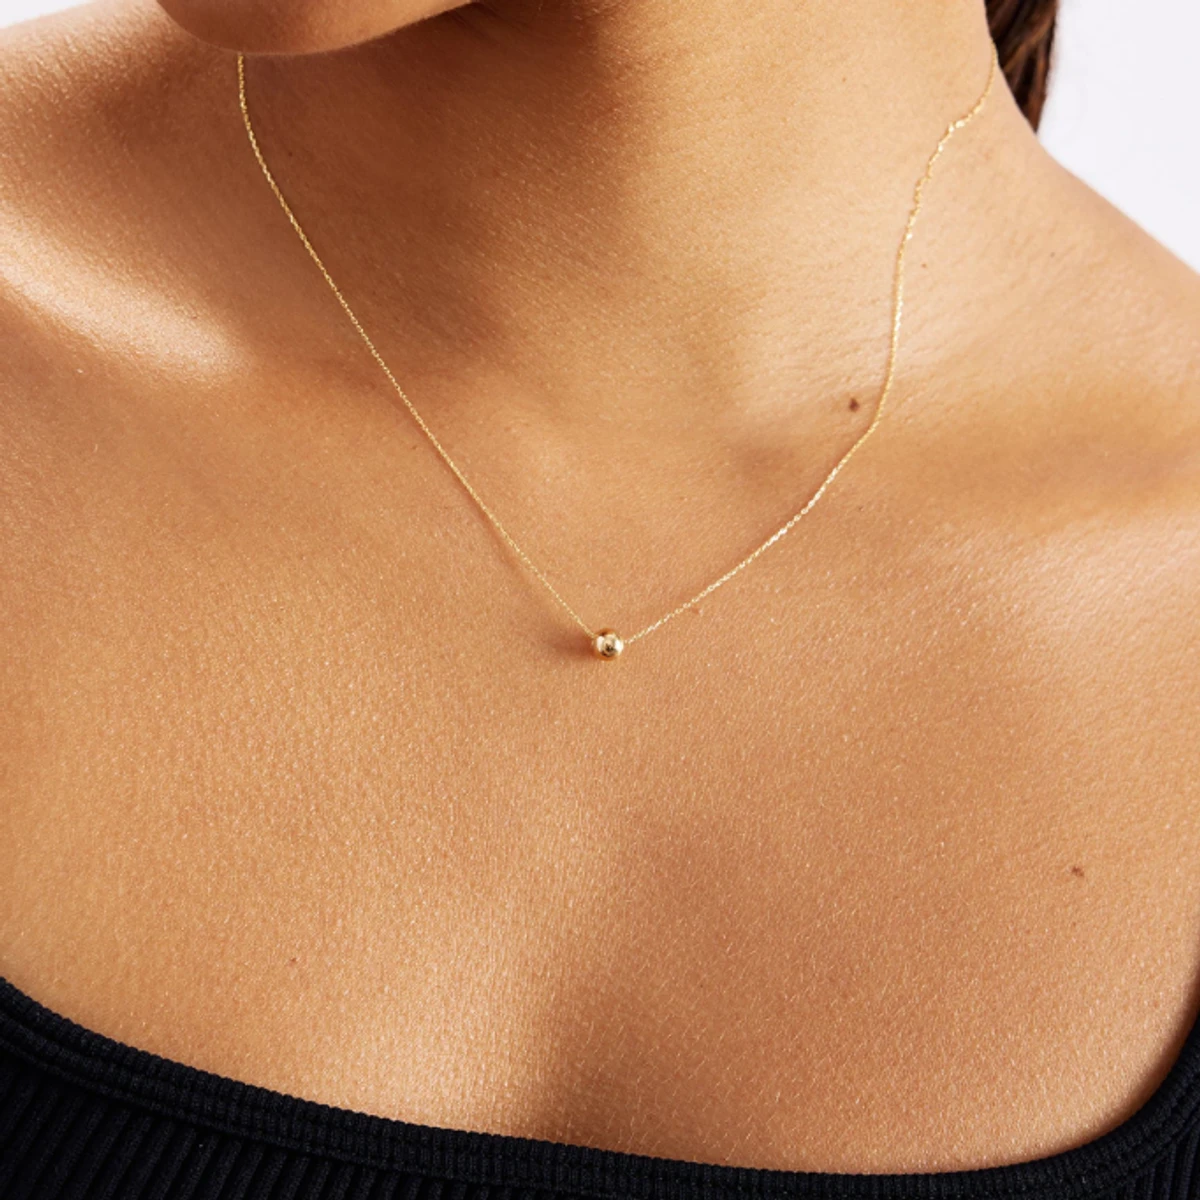 Pearl Pendant Gold Chain Necklace